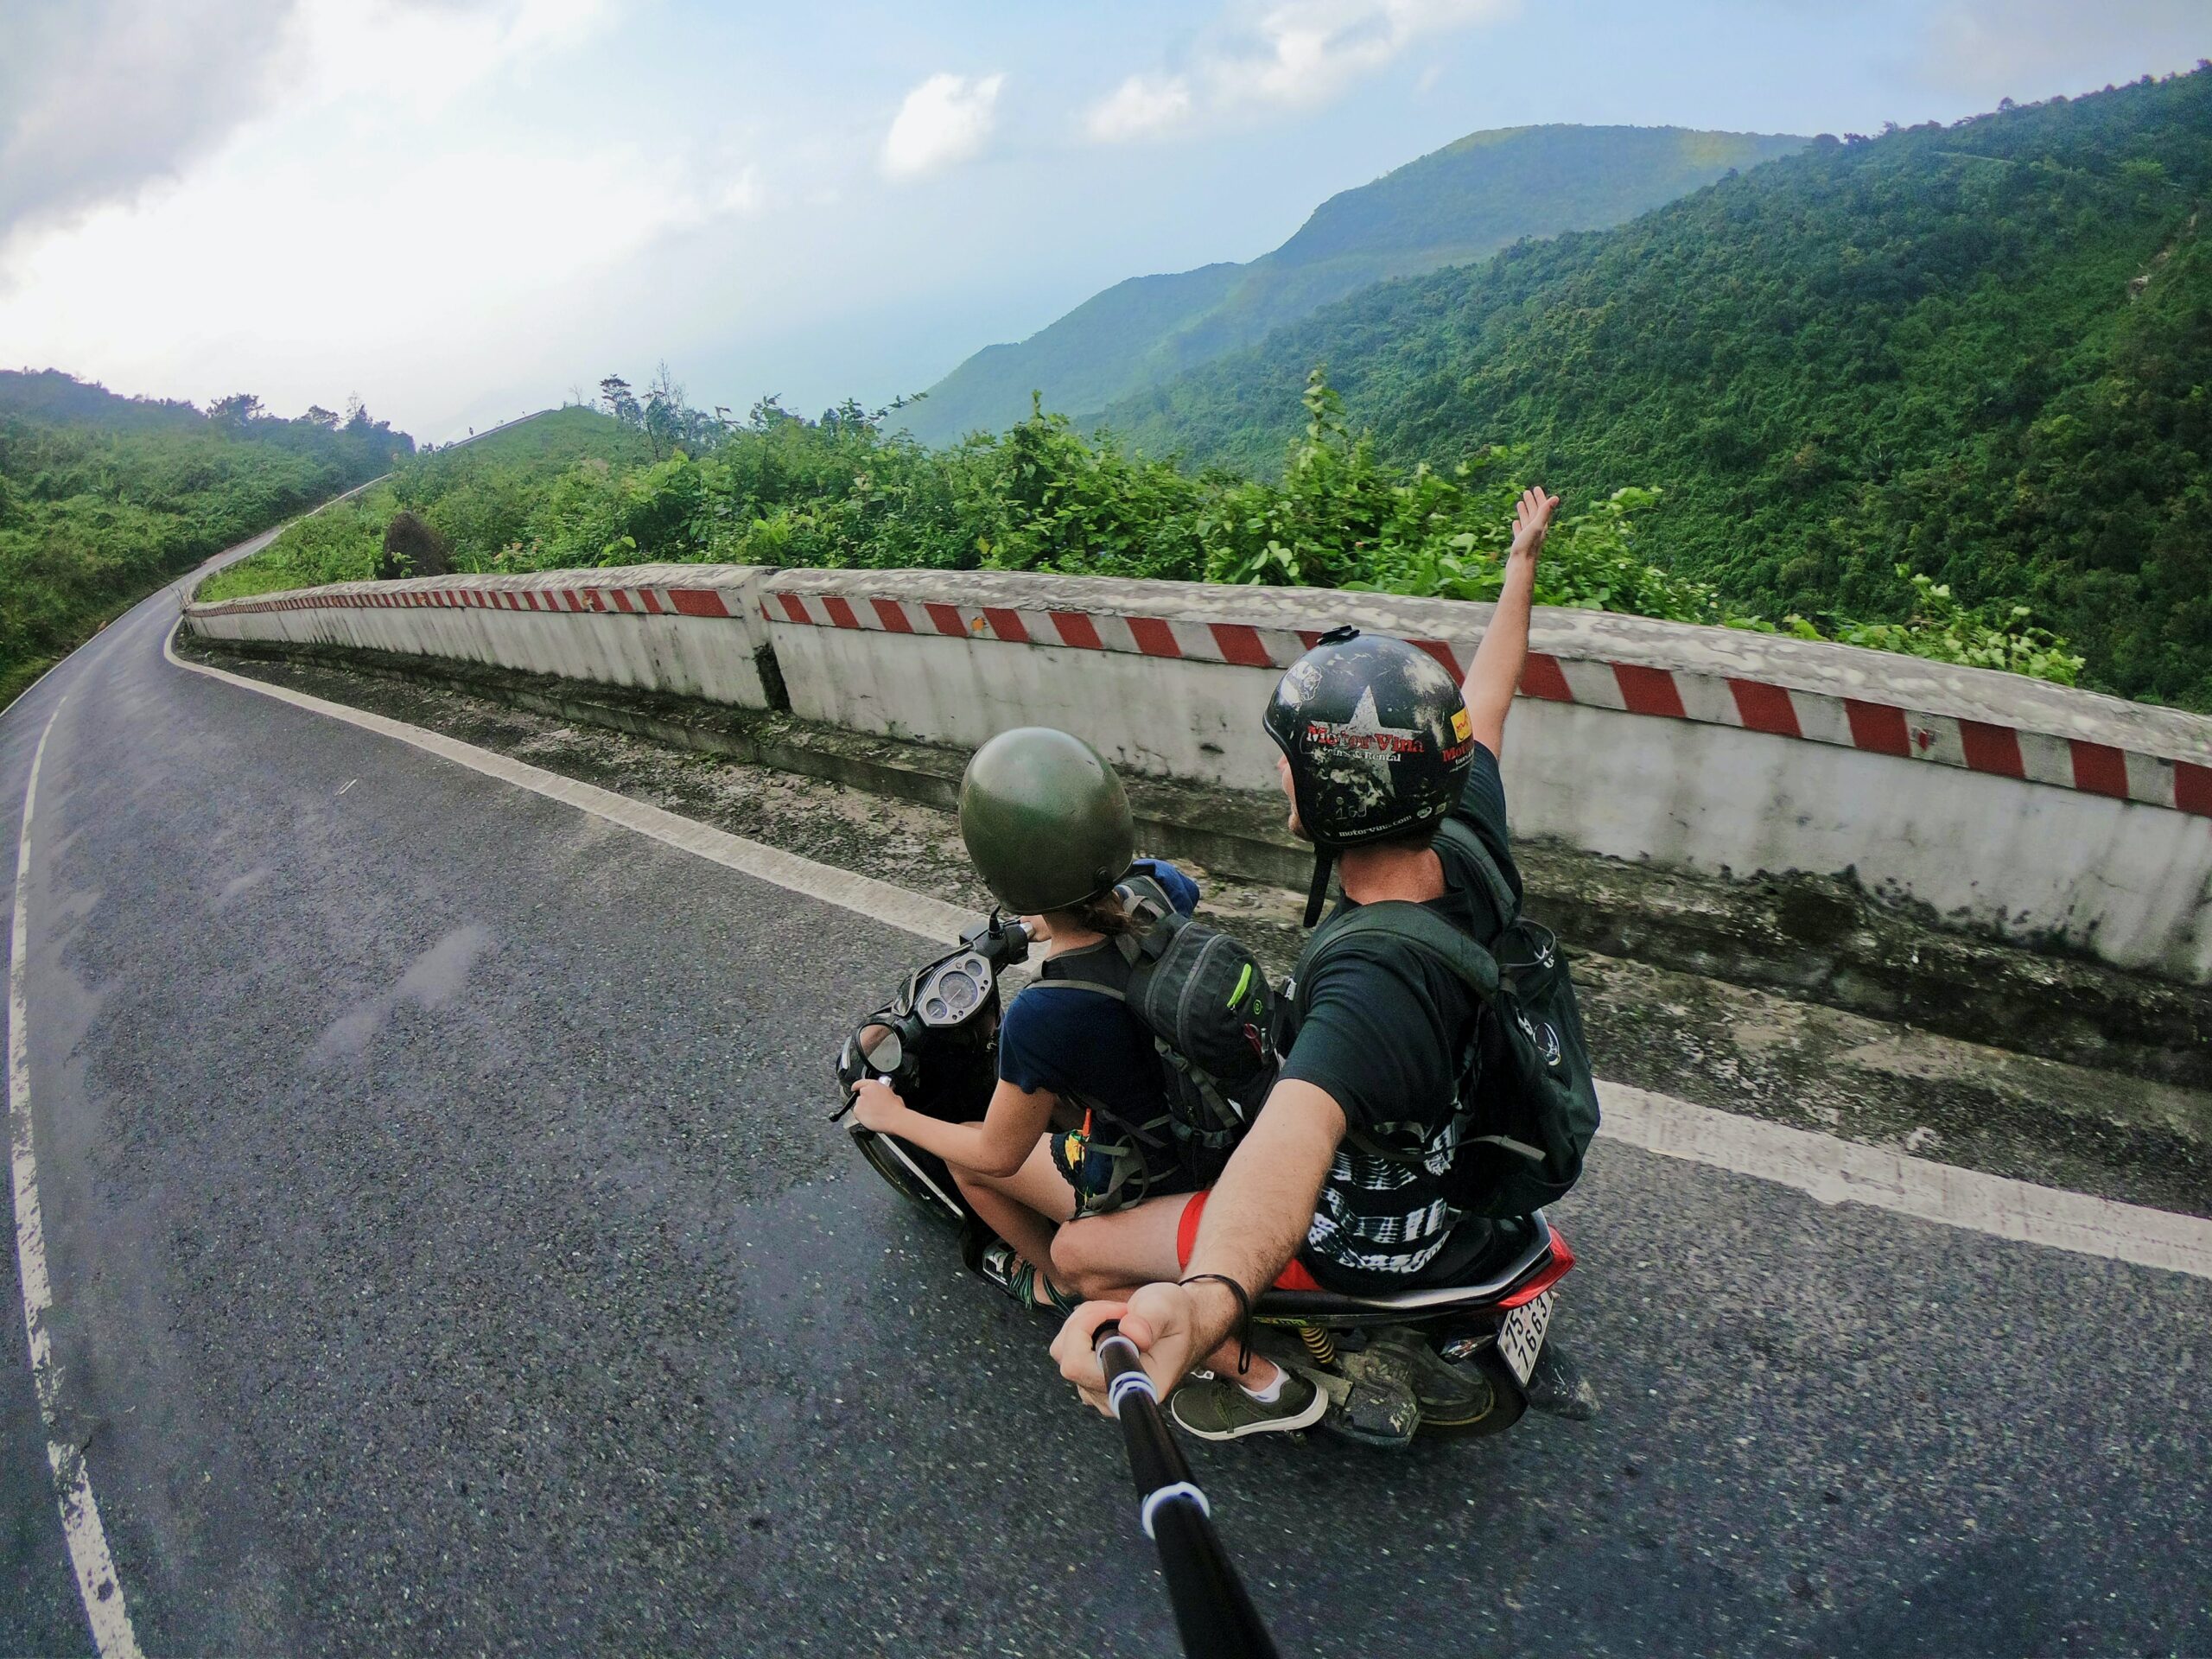 Fish-eye style photo of two Gen Z backpackers riding on a motorbike, a sustainable form of transportation. They are driving on a rural road in central Vietnam, surrounded by rolling hills covered with beautiful green plants. Photo by Jordan Opel on Unsplash.